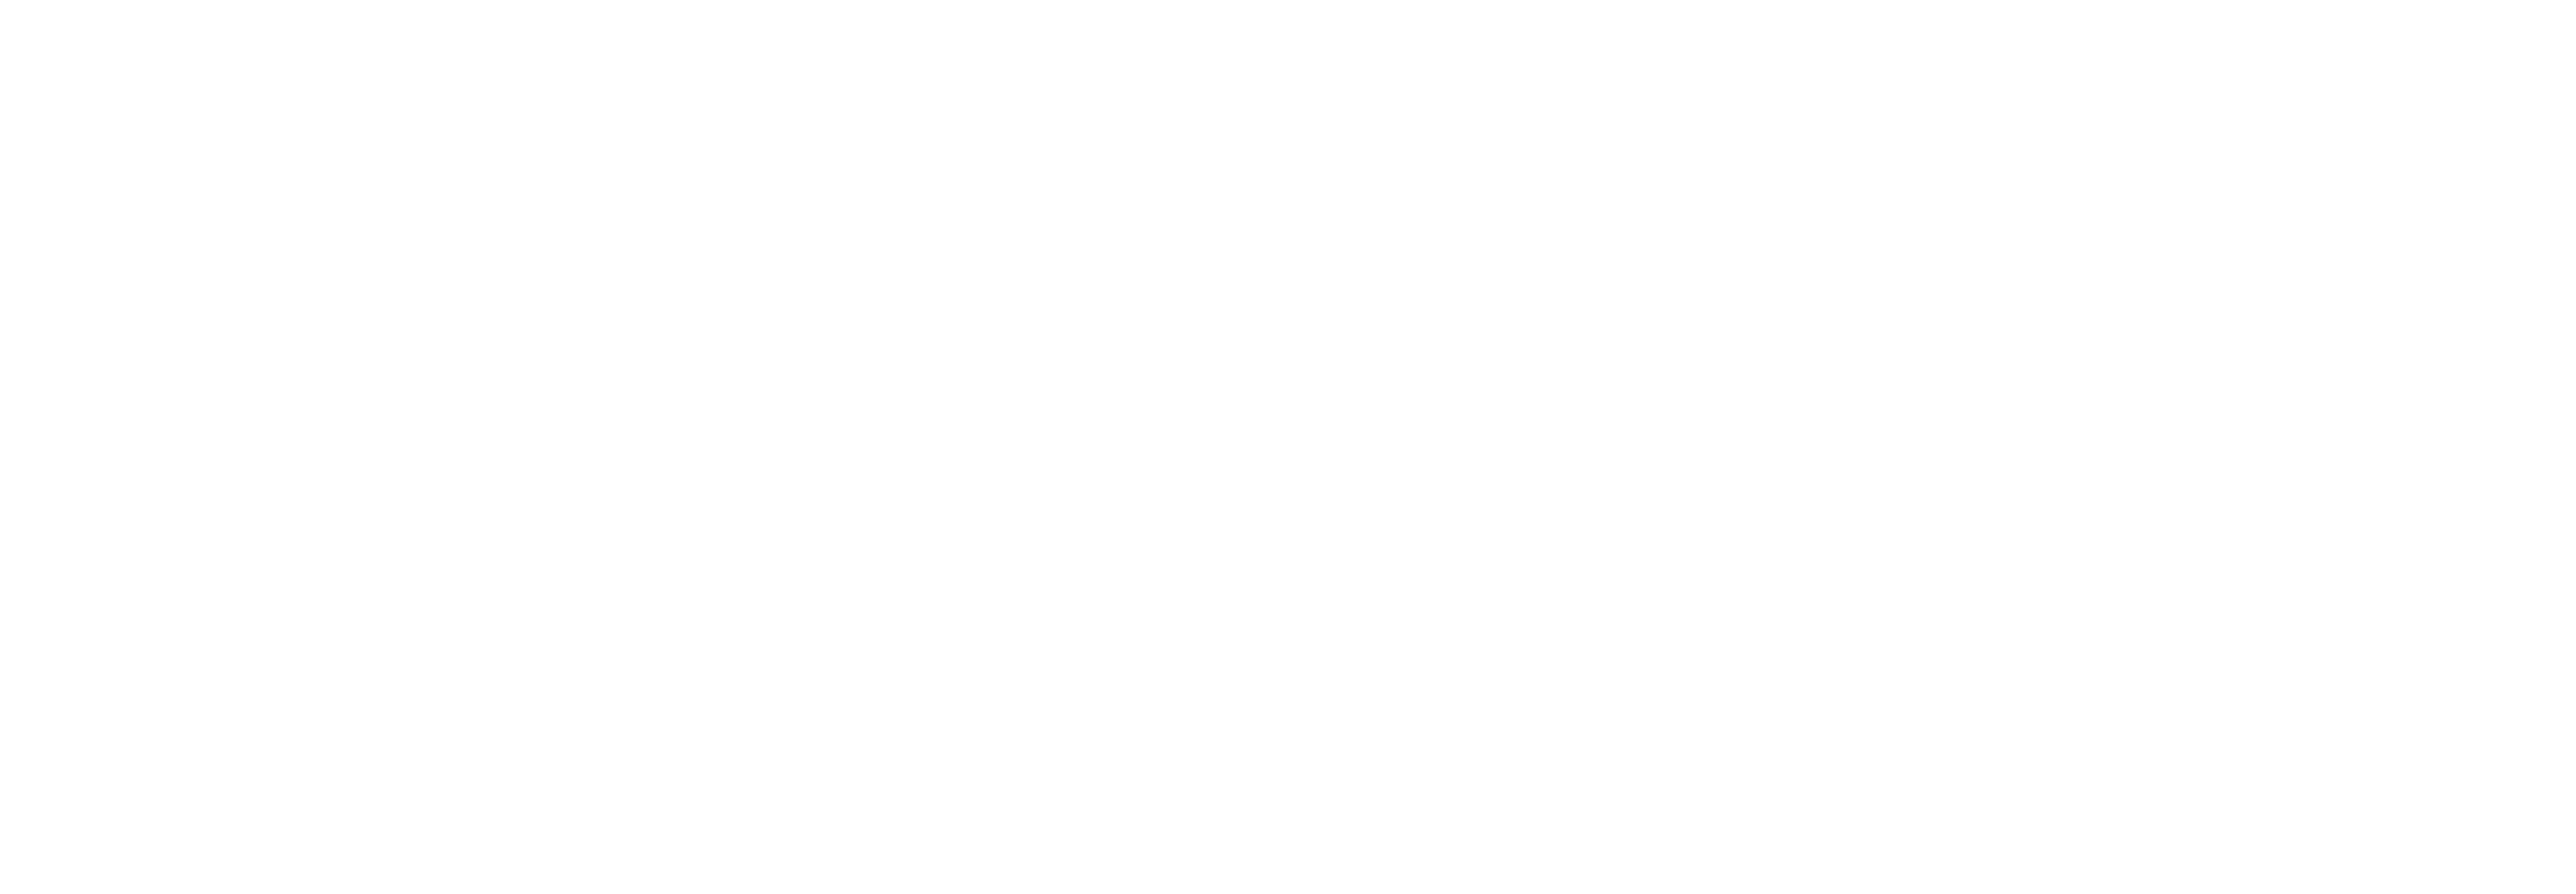 Sports Apparel Logo - Activated Sports Apparel